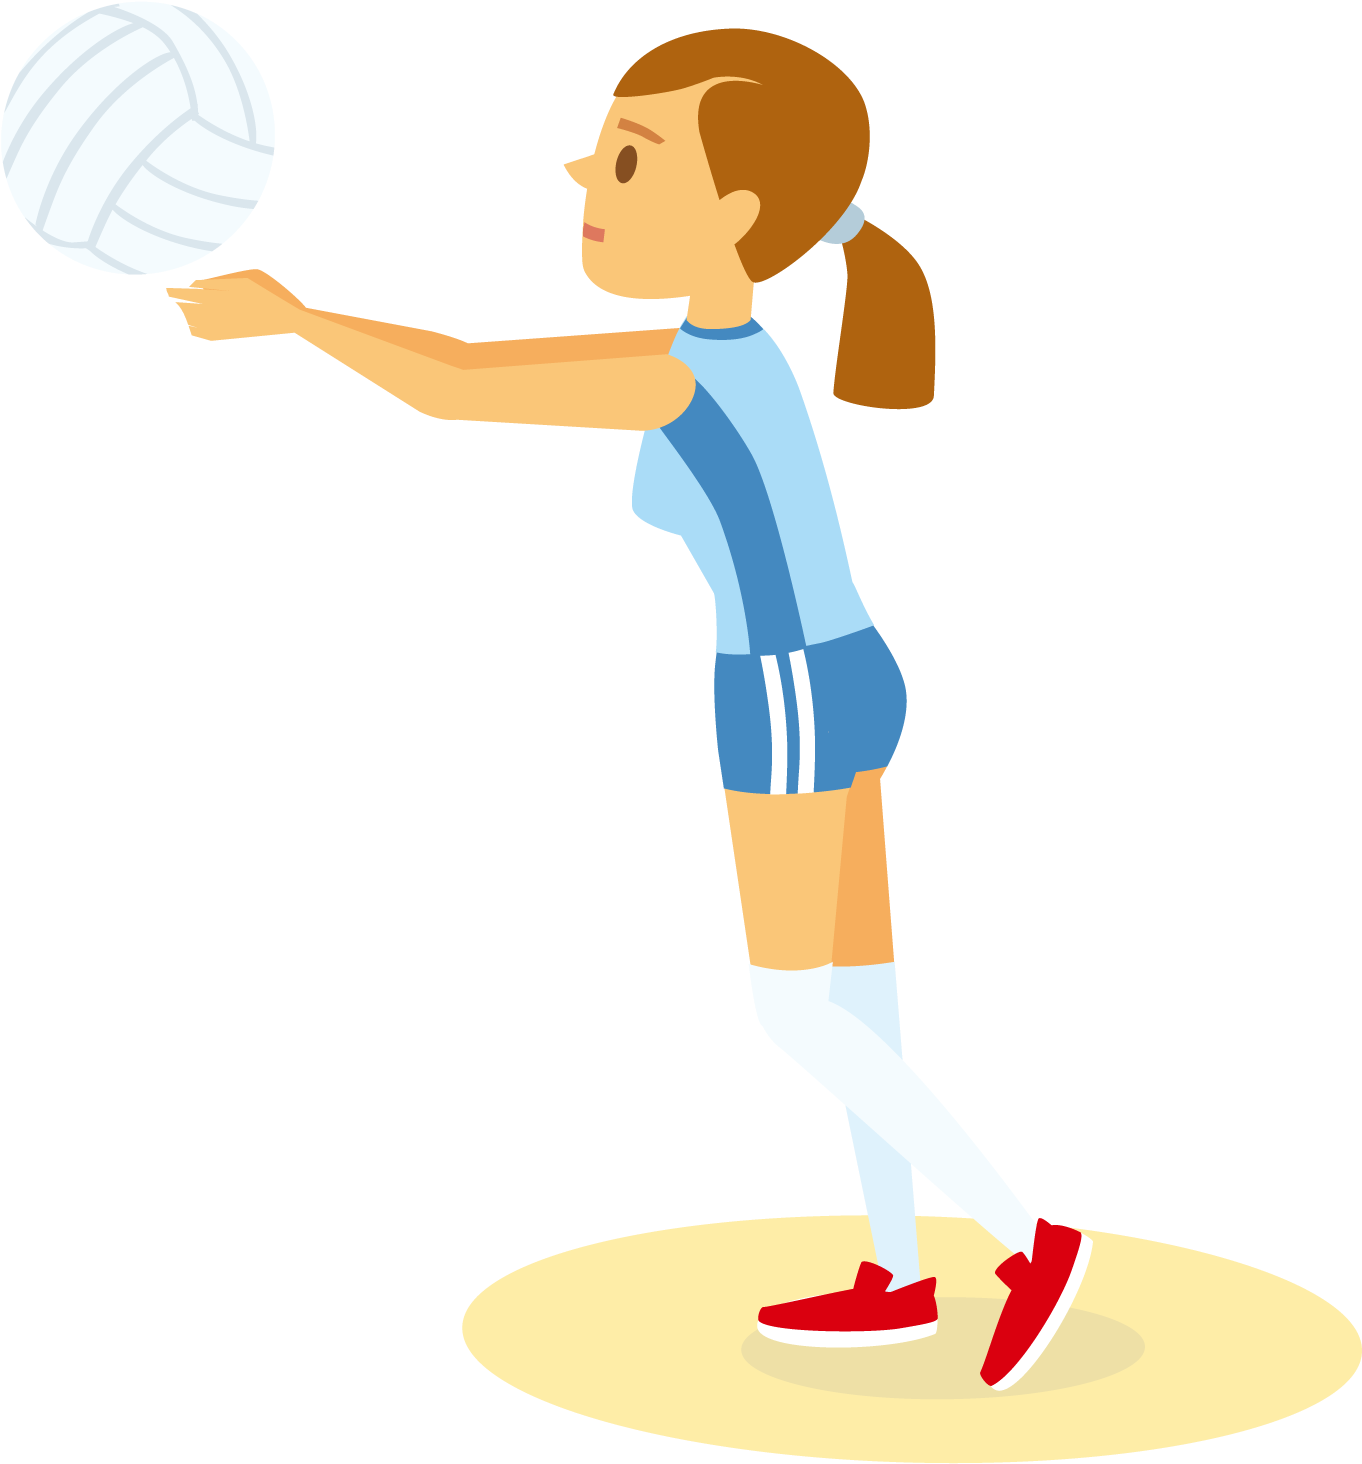 A Cartoon Of A Woman Playing Volleyball